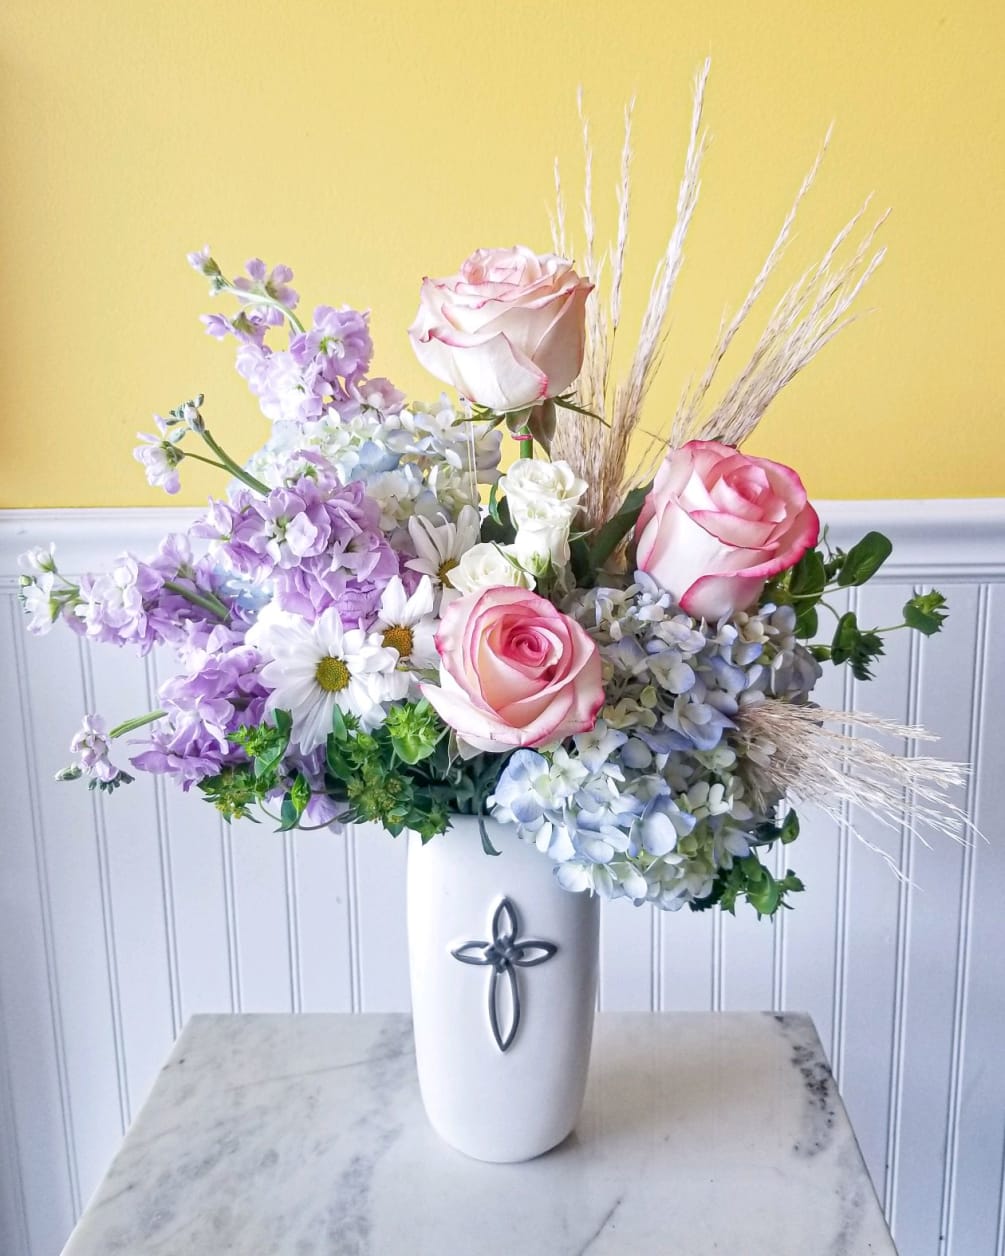 Timeless beauty abounds in this arrangement of Purple stock and soft pinks